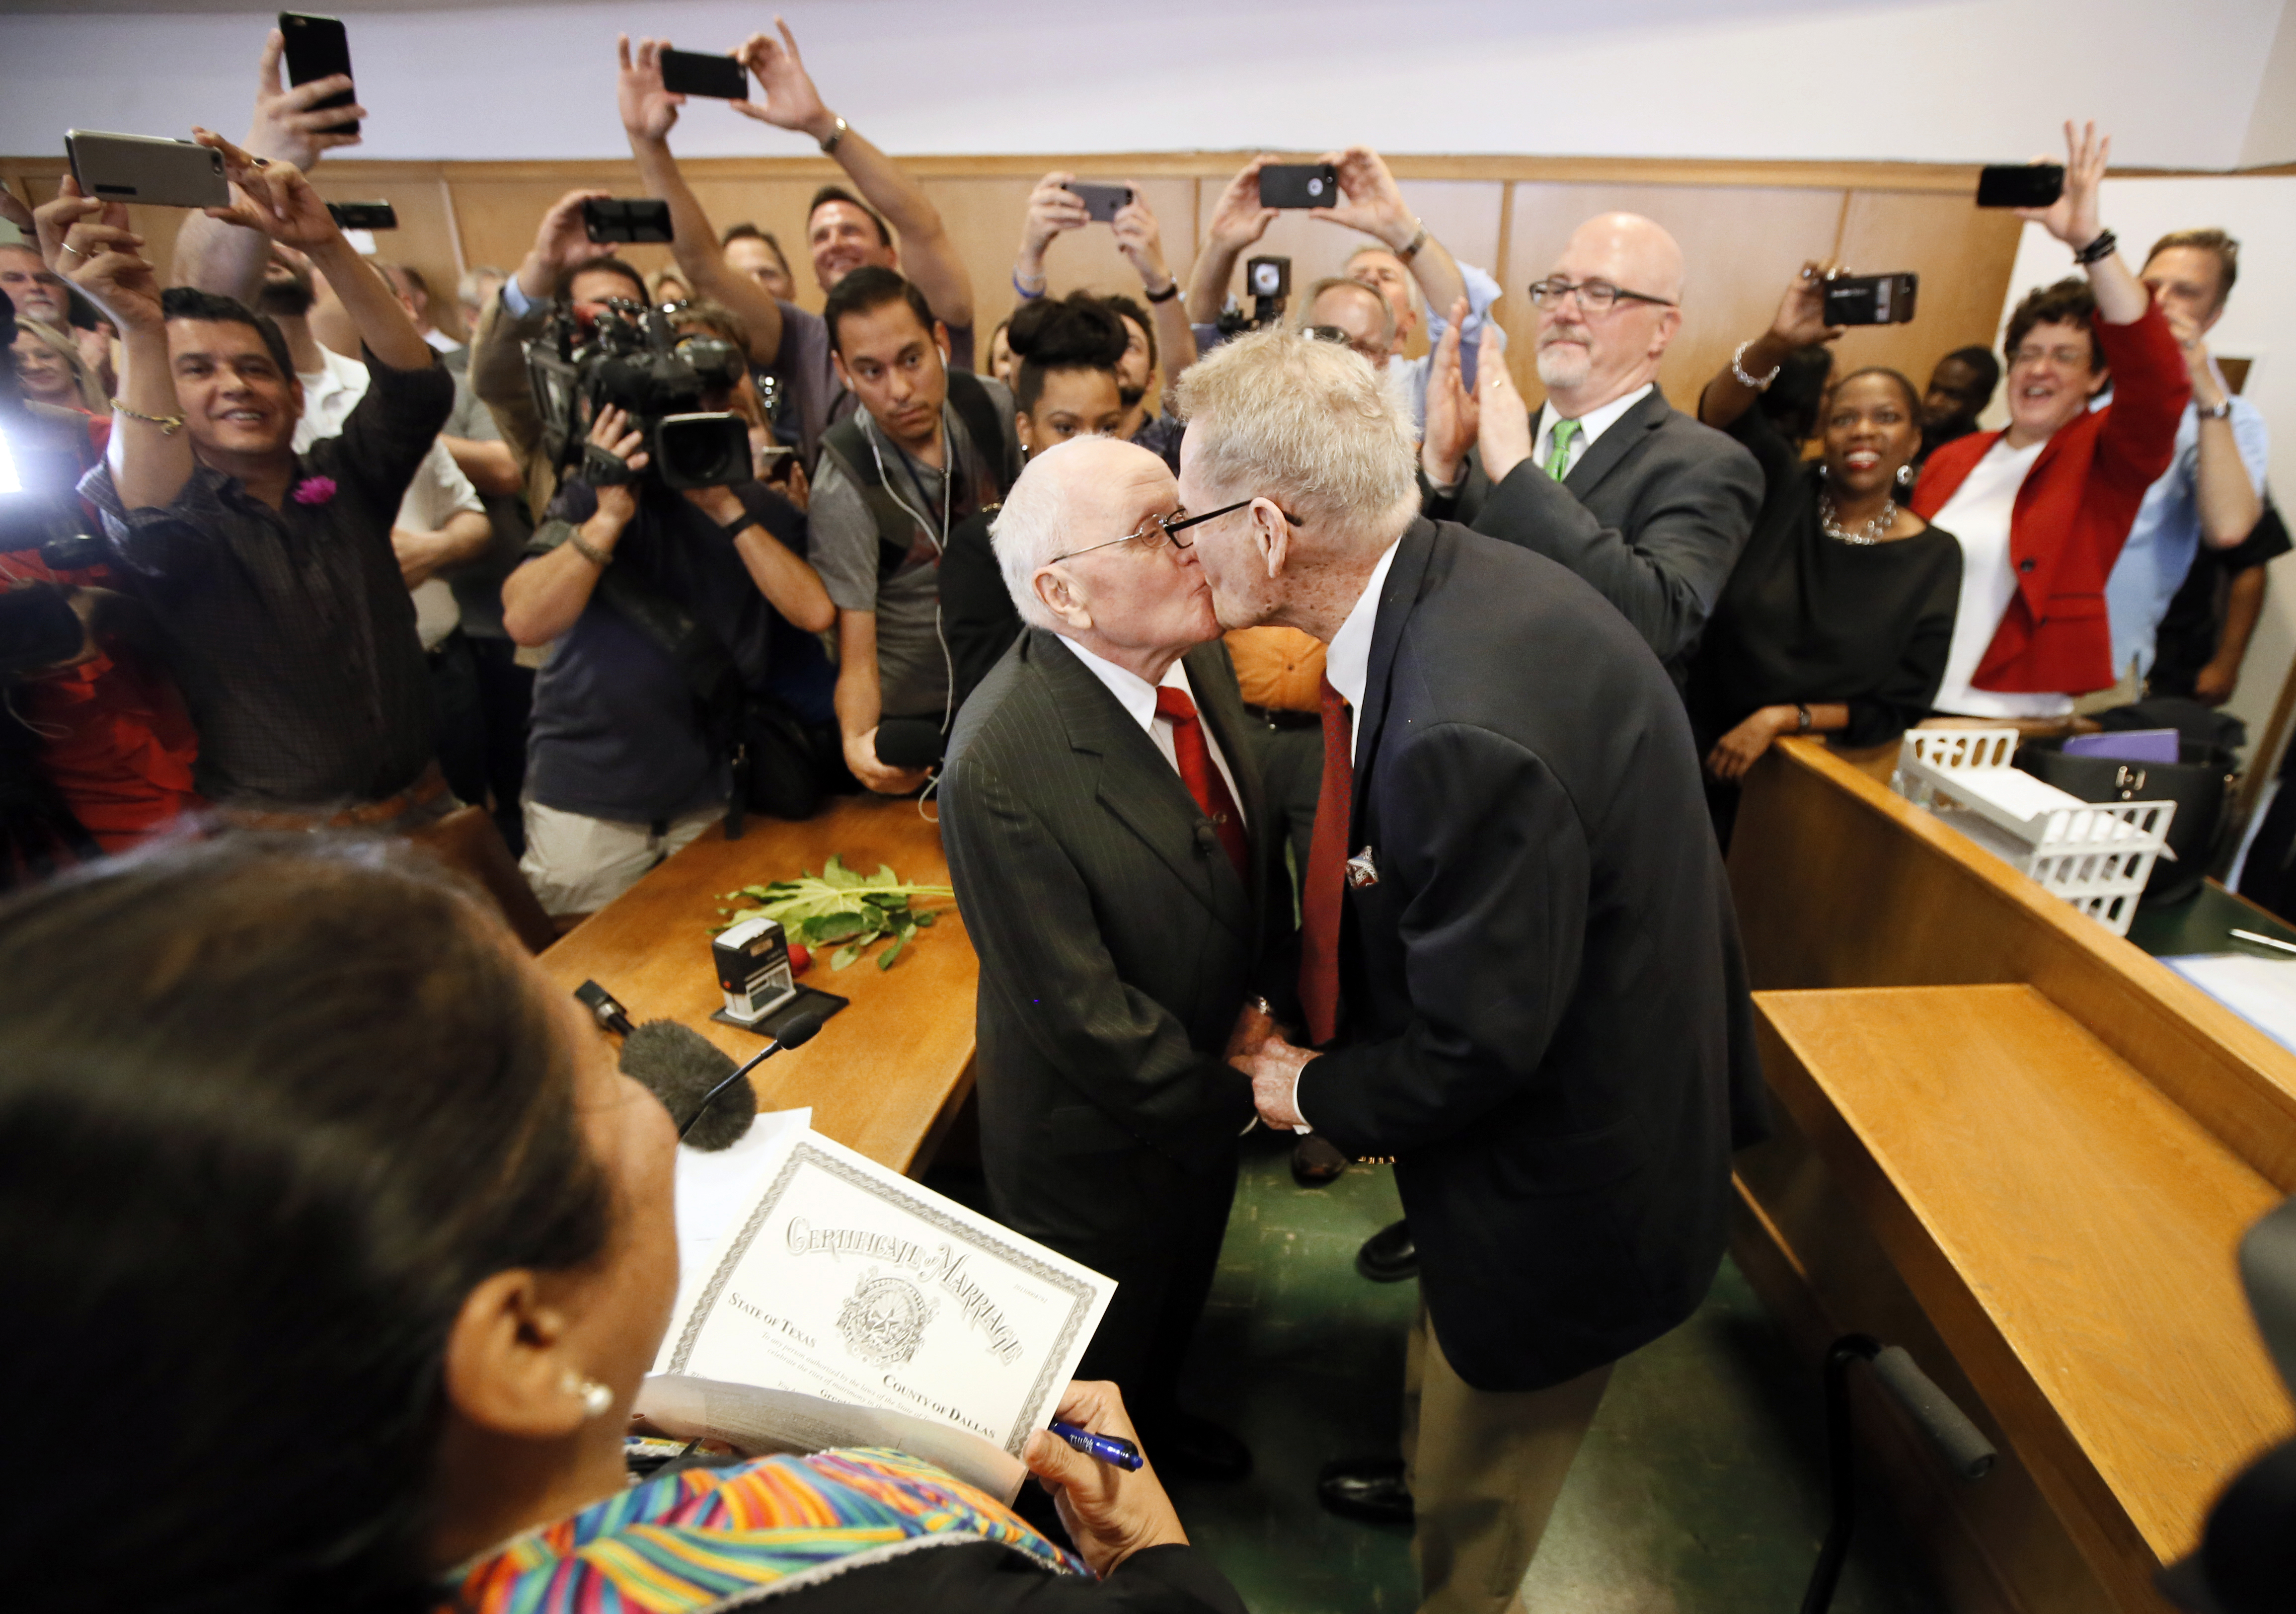 Judge Dennise Garcia, left front, watches as George Harris, center left, 82, and Jack Evans, center right, 85, kiss after being married by Judge Garcia in Dallas on June 26, 2015. (Tony Gutierrez—AP)